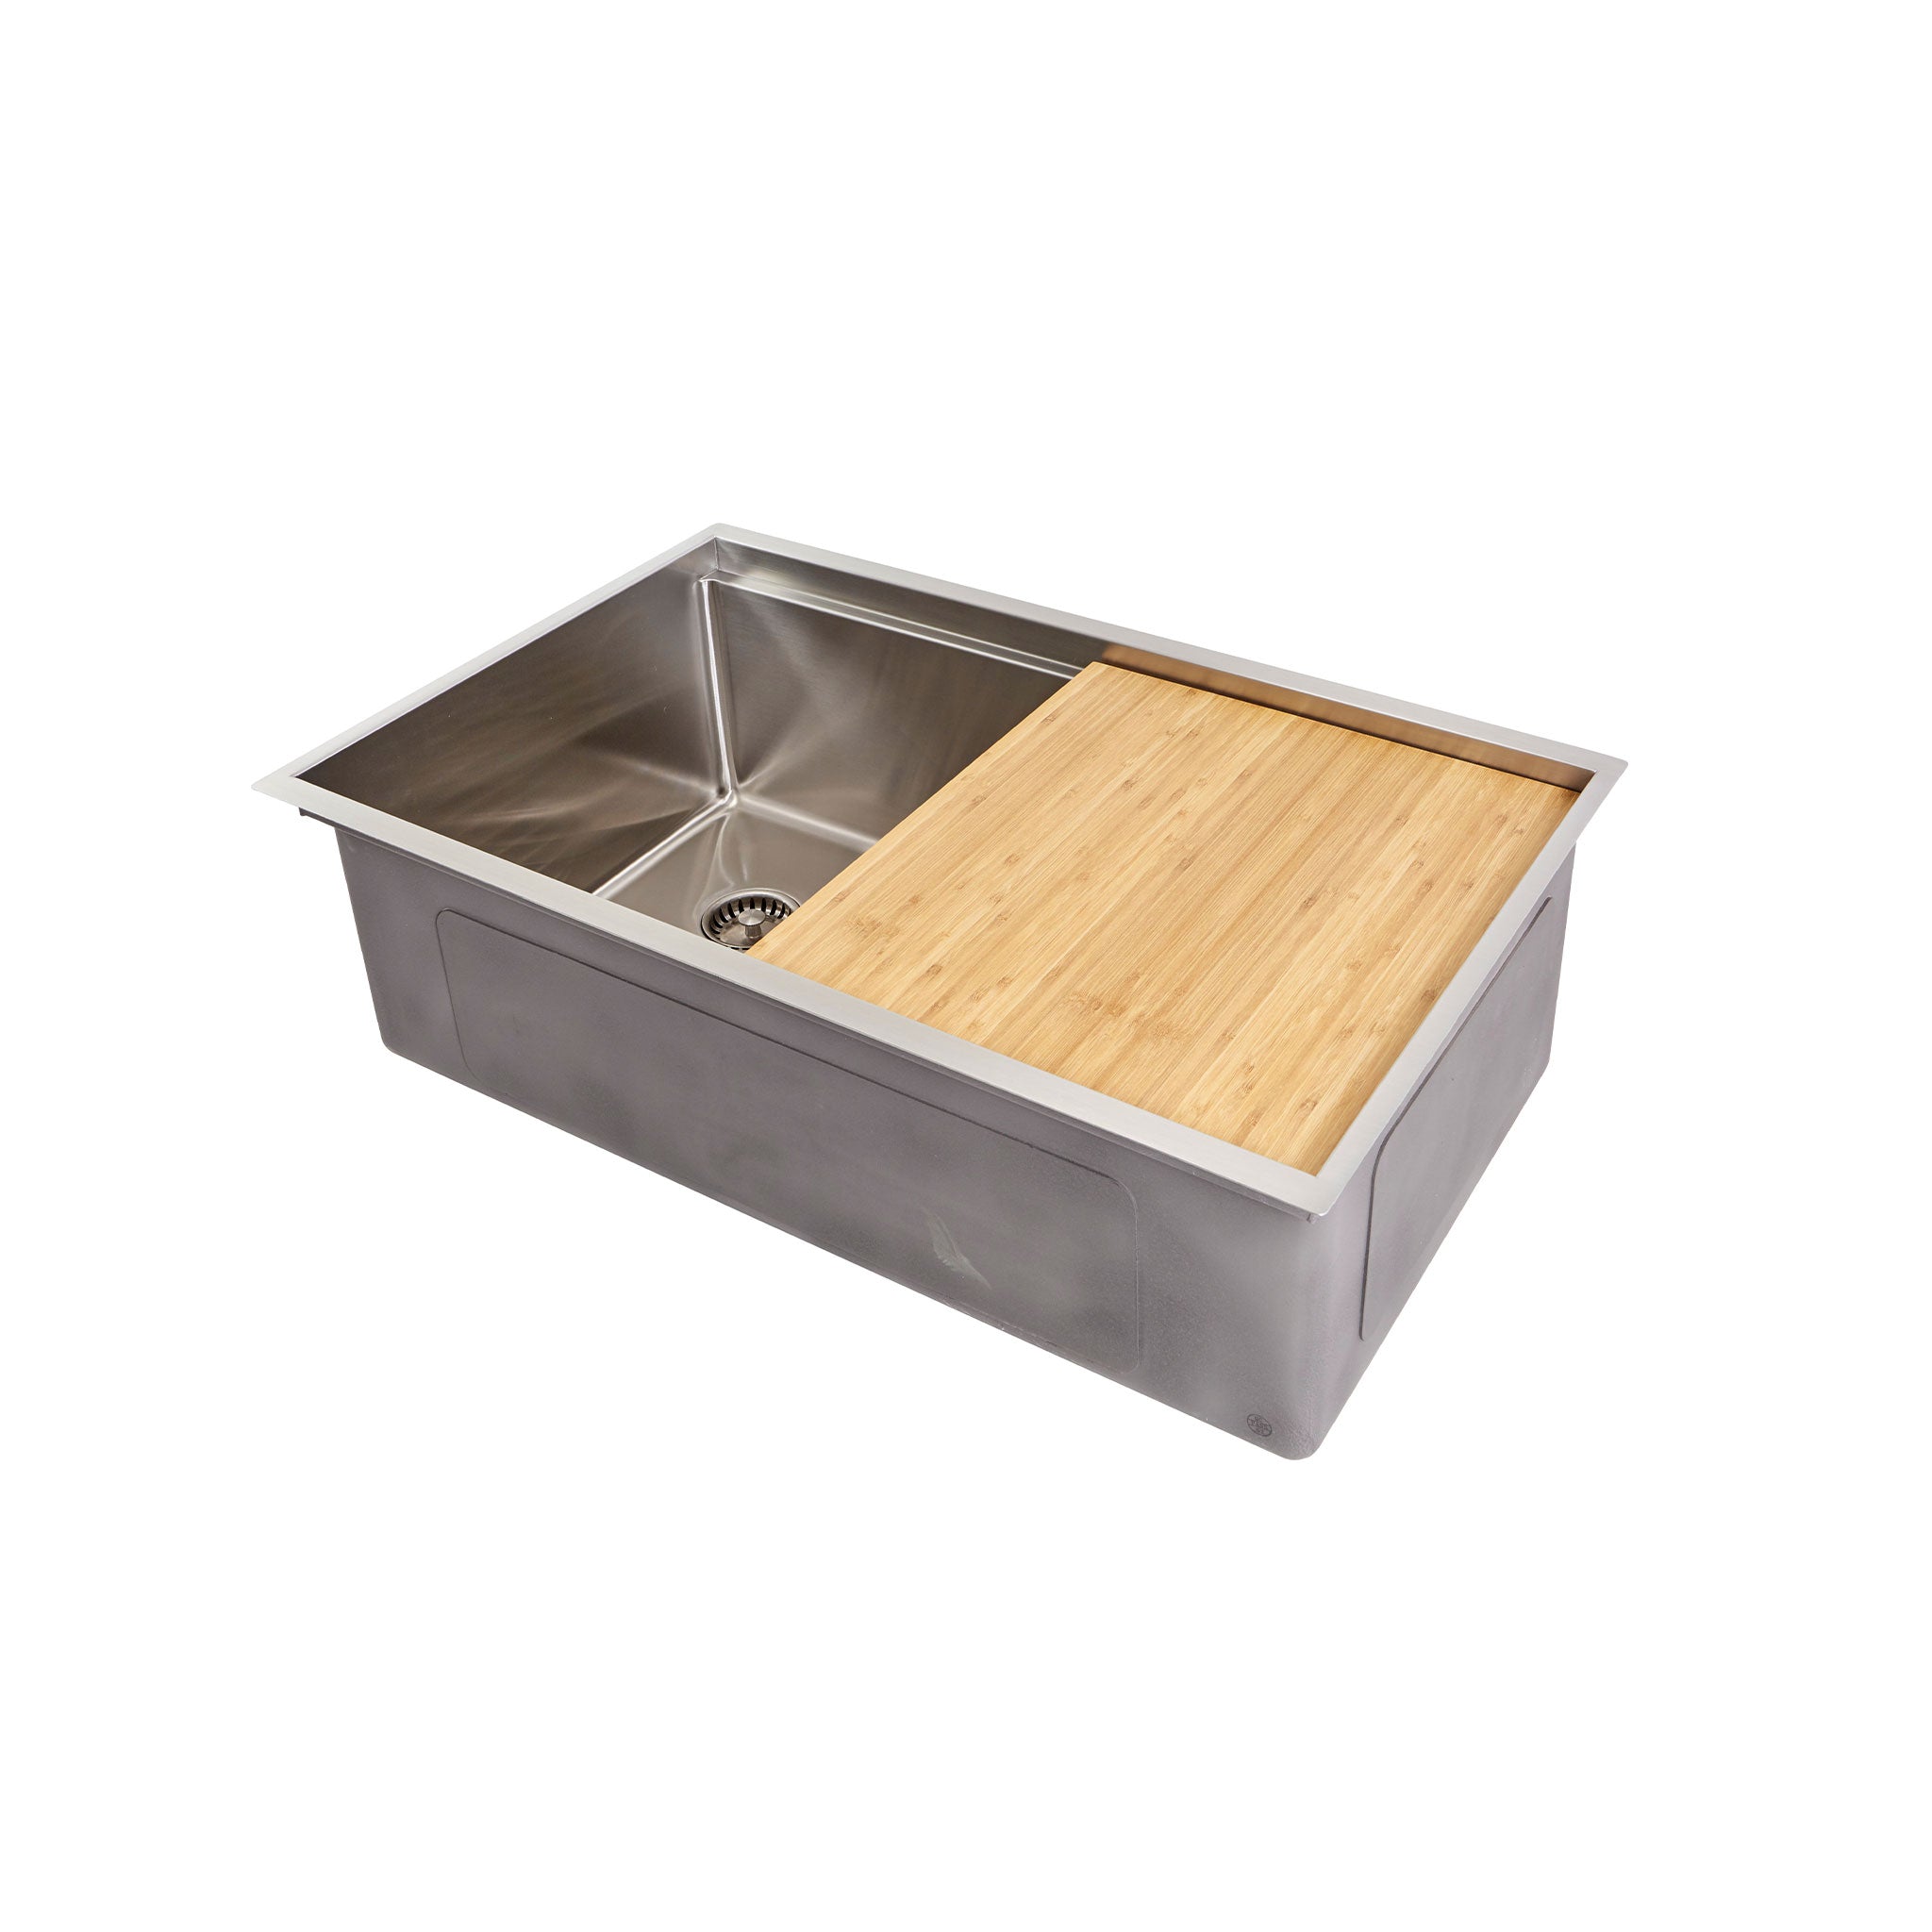 31” workstation sink and a bamboo cutting board accessory with an offset, seamless drain to the left.